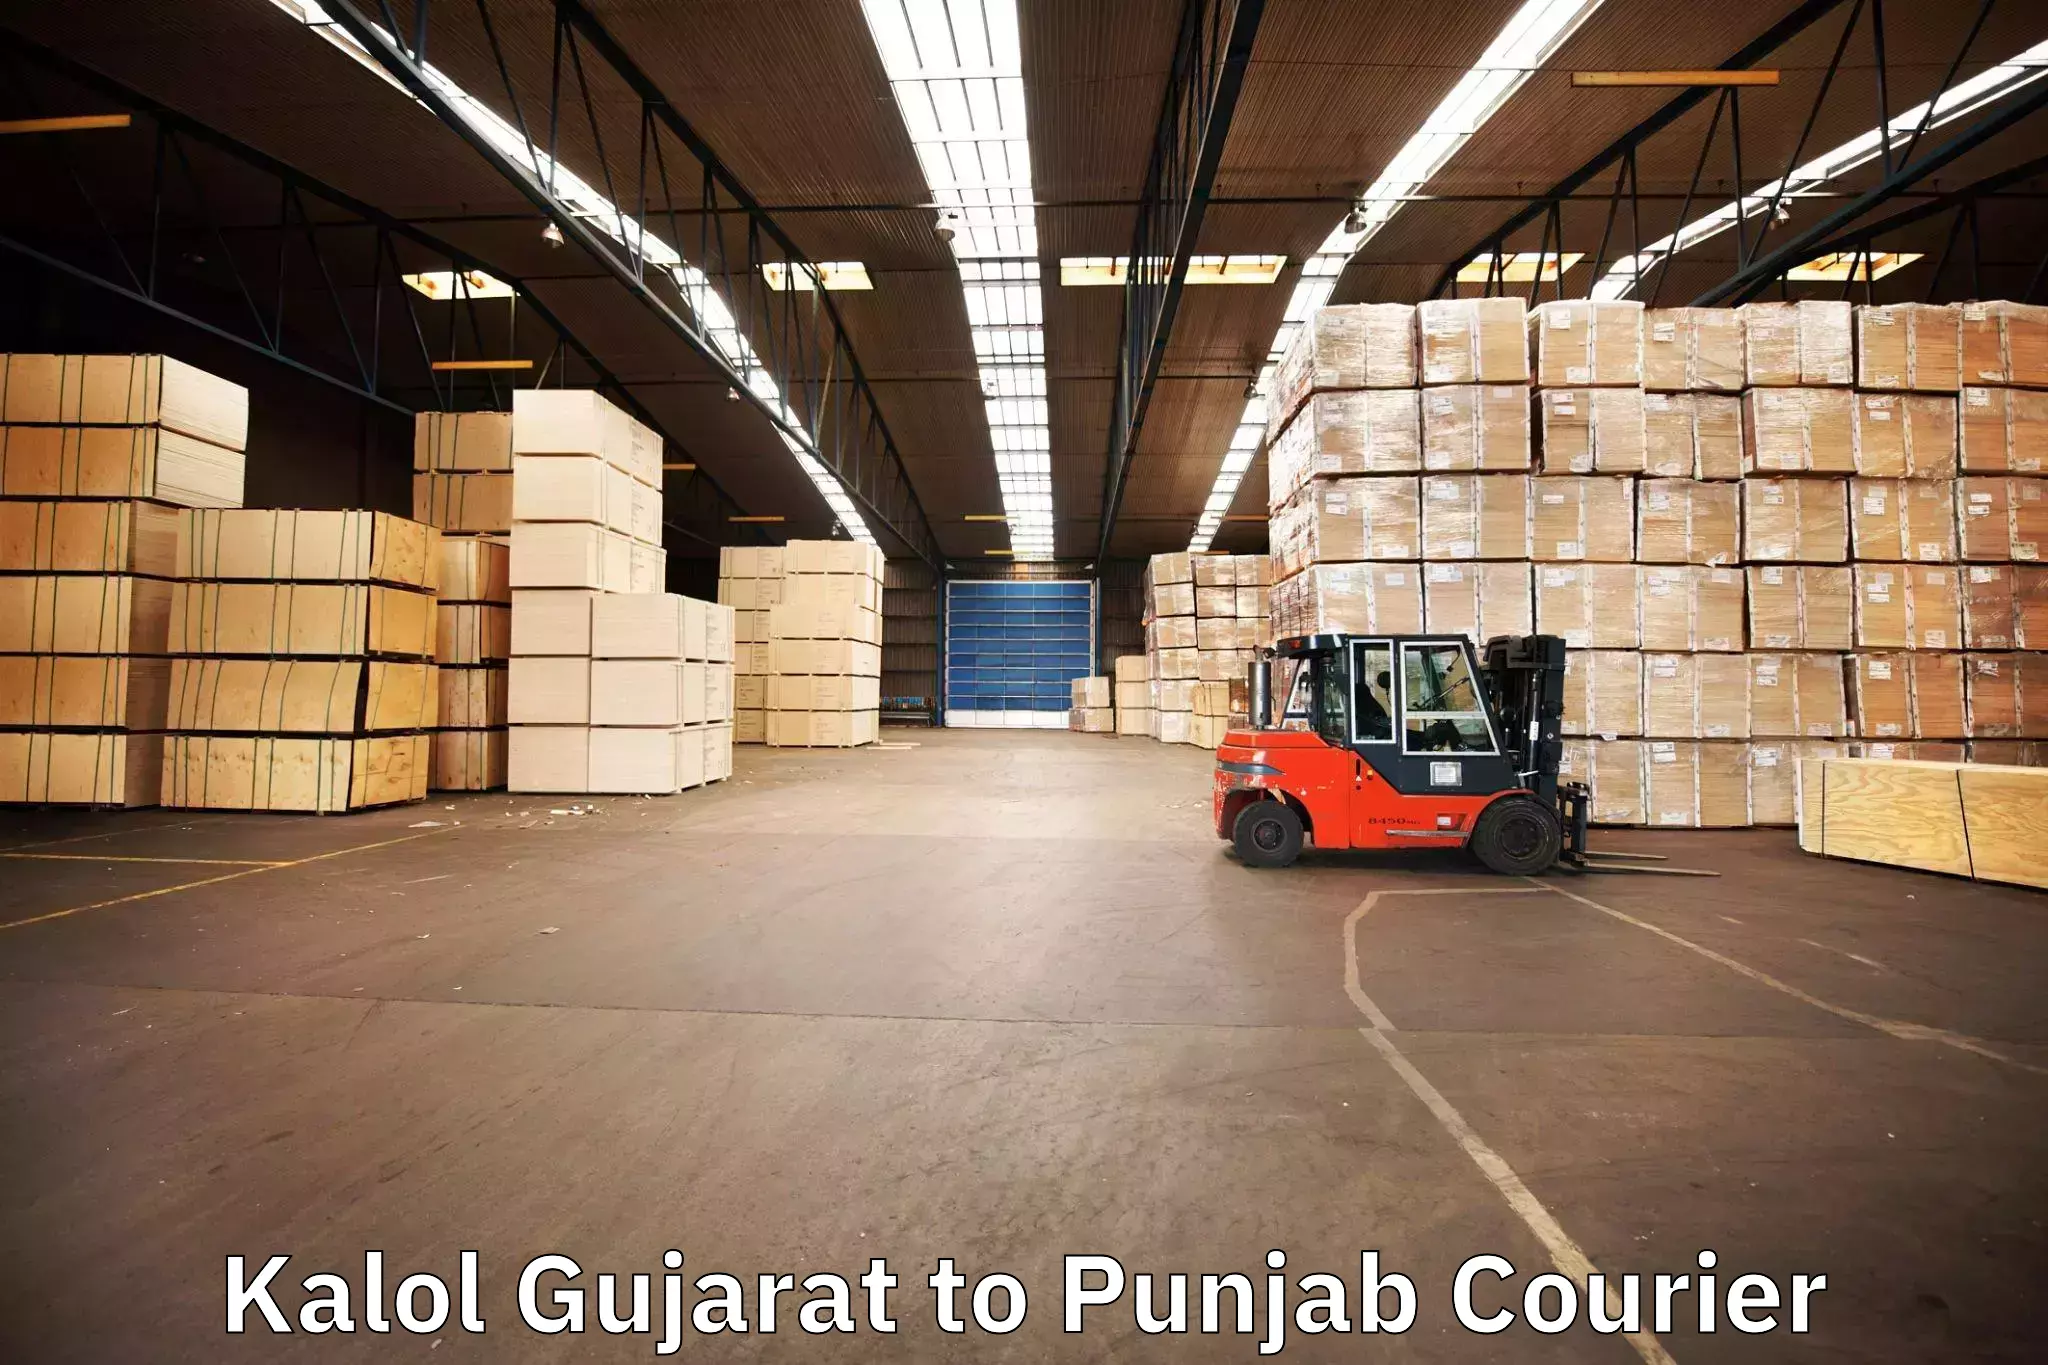 Quality relocation assistance Kalol Gujarat to Amritsar